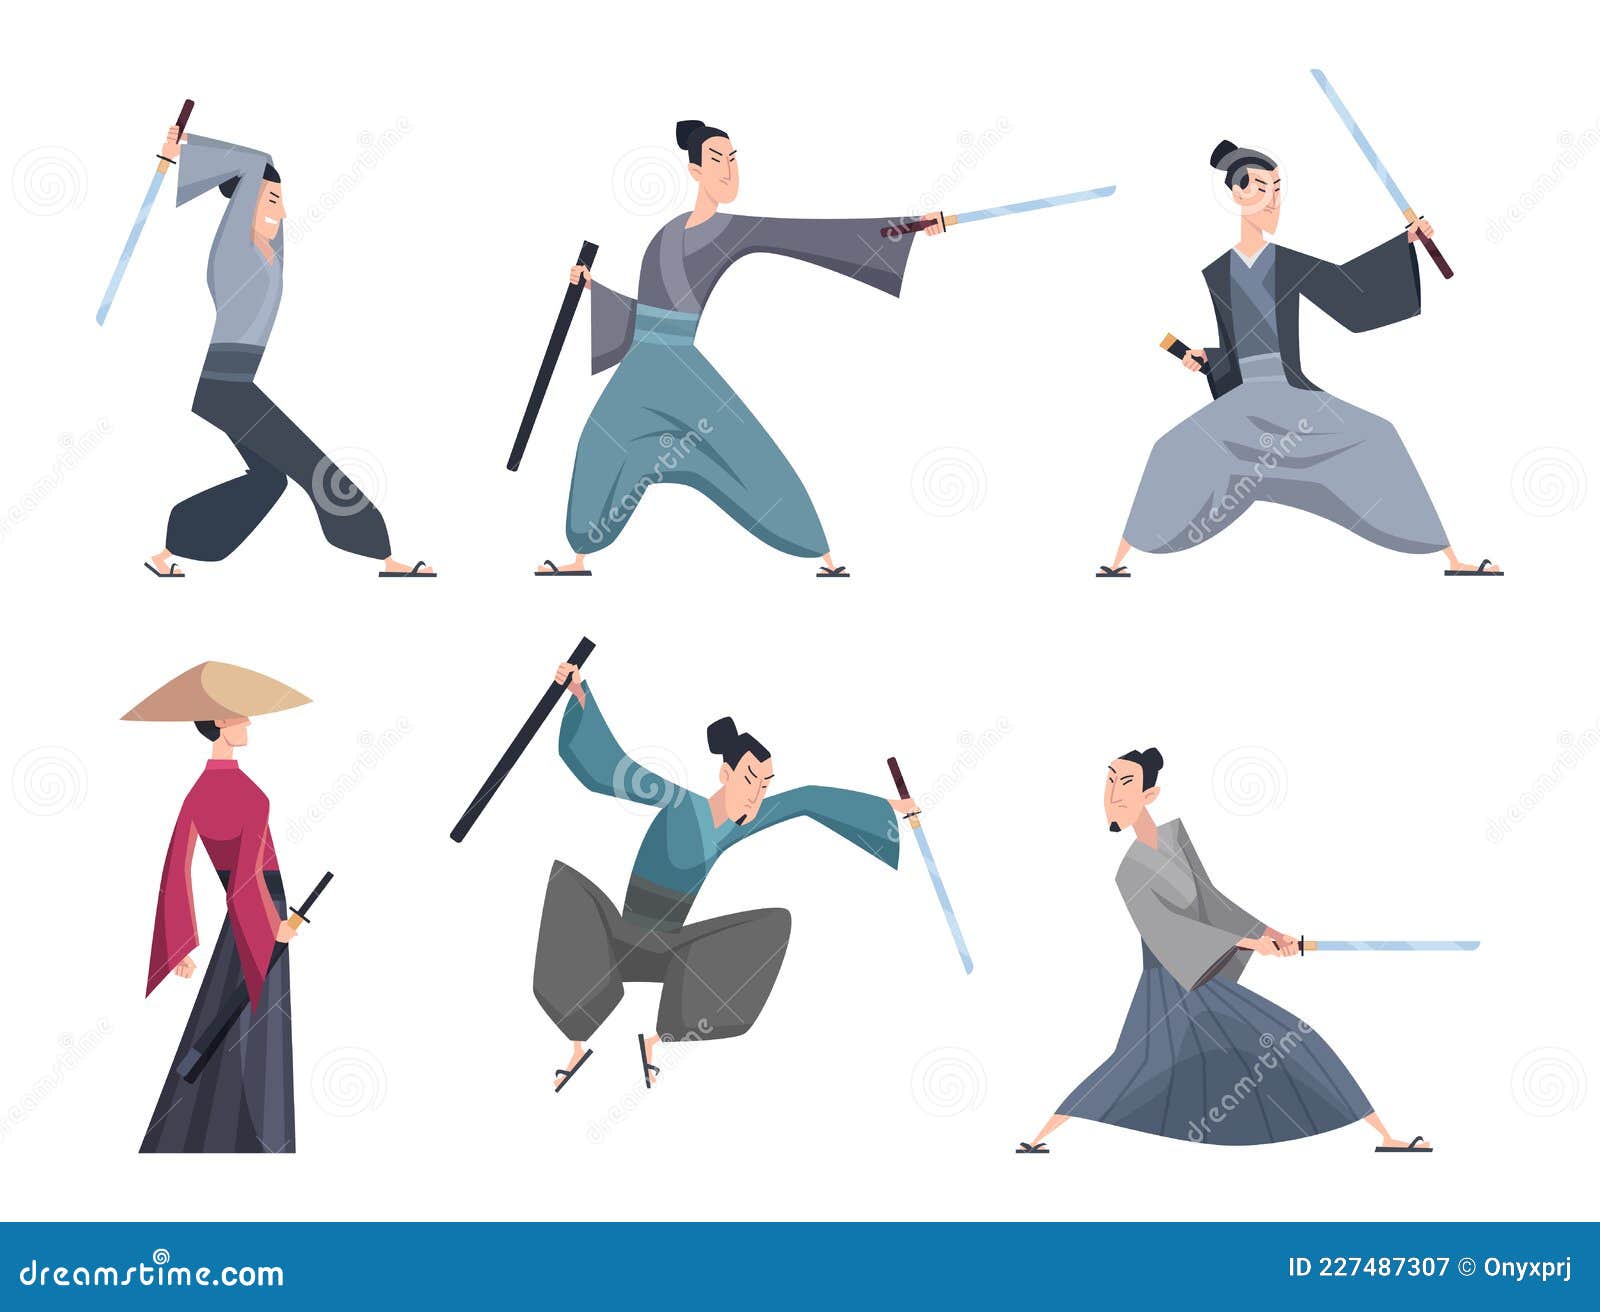 Premium Vector | Samurai male asian warriors with sword various action poses  exact vector cartoon characters isolated